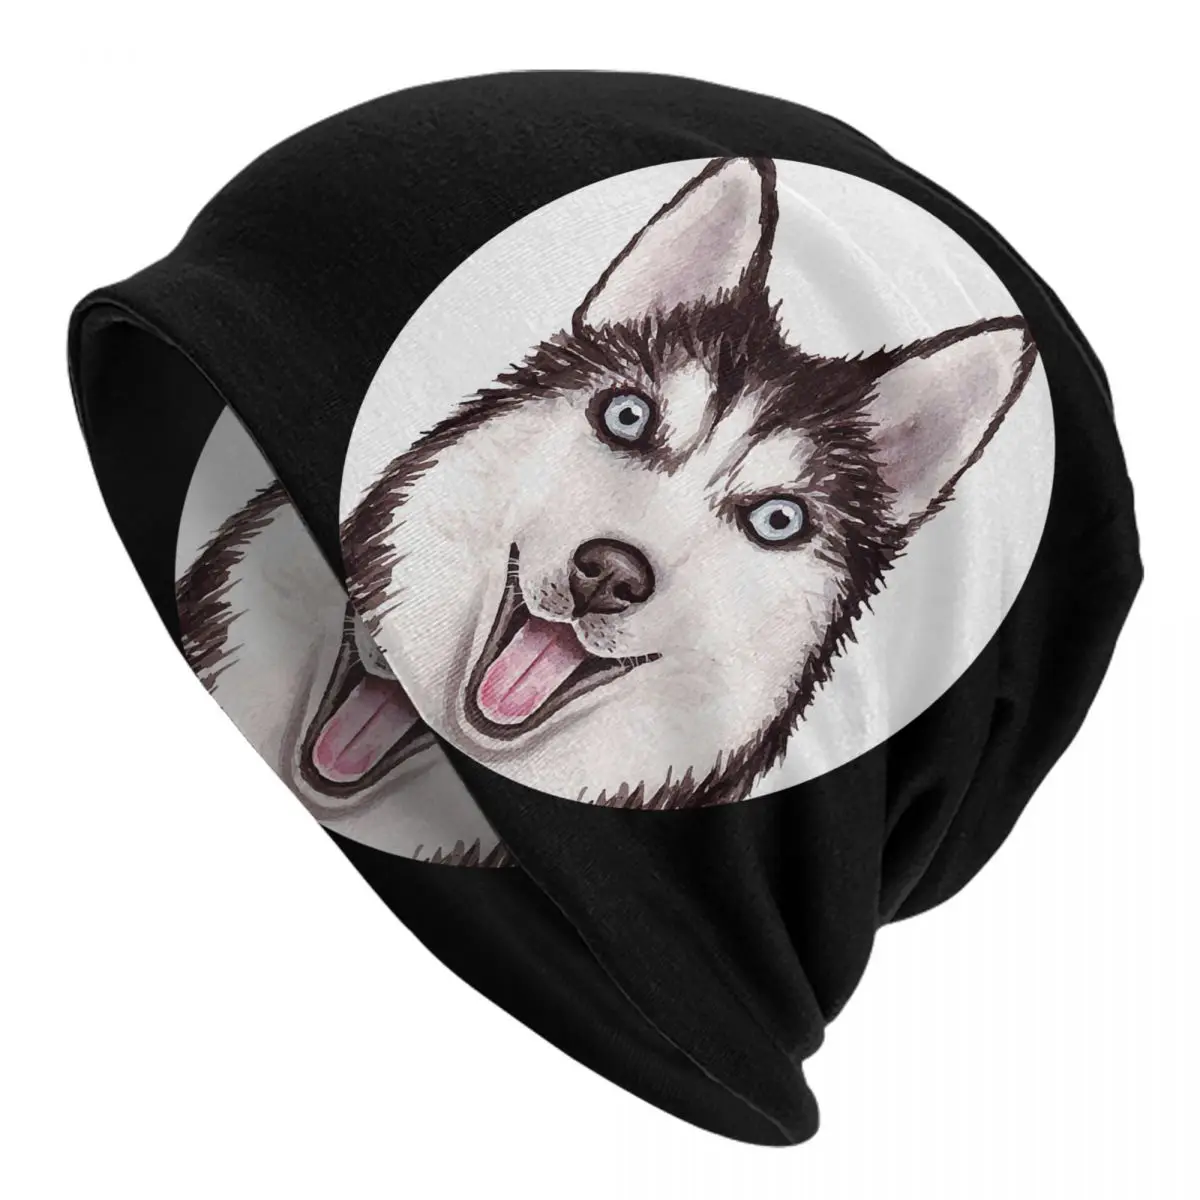 Siberian Husky Head Dog Breed Animal Pet Lover Gift Adult Men's Women's Knit Hat Keep warm winter Funny knitted hat